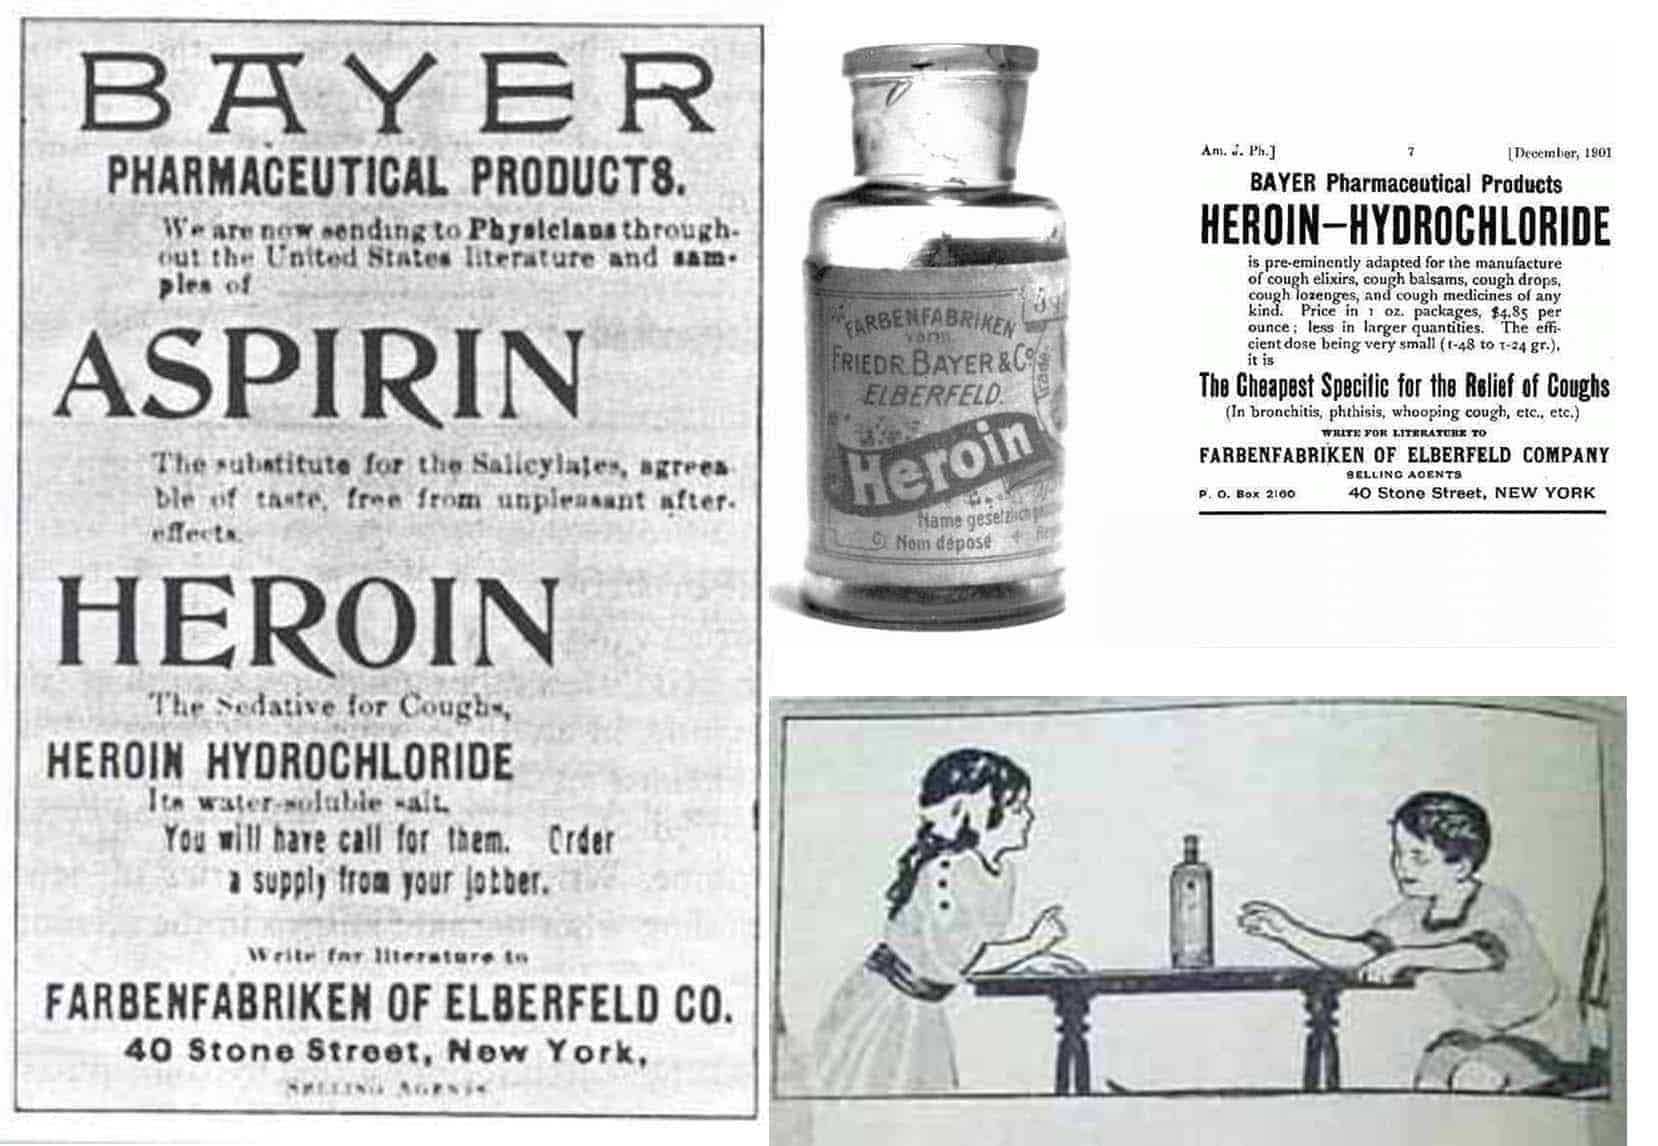 Heroin: The Deadly Narcotic That Was Once Medicine!